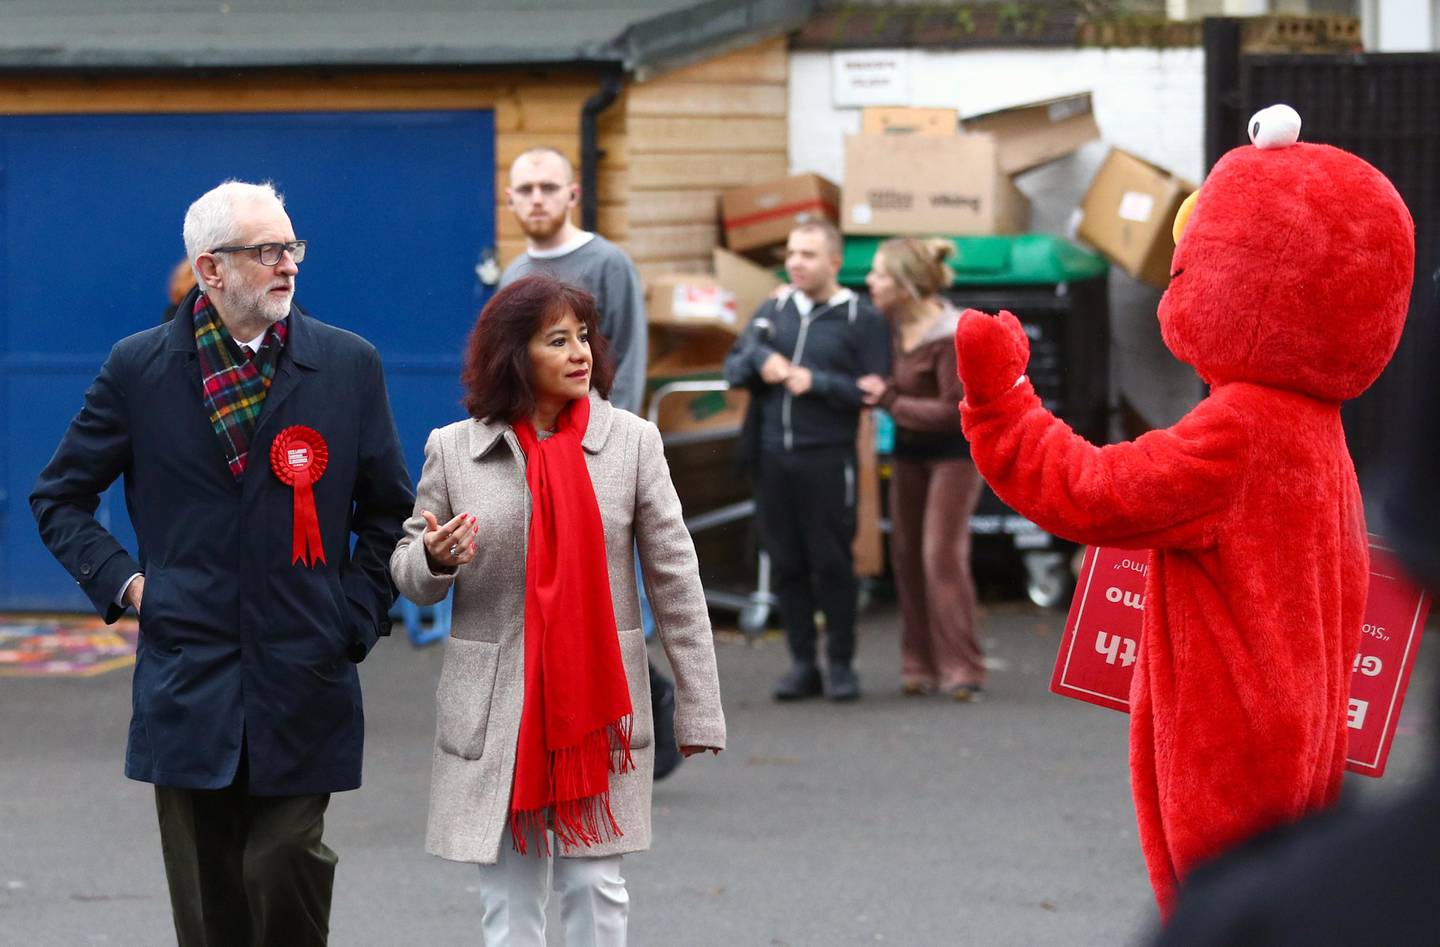 Britain's opposition Labour Party leader Jeremy Corbyn and his wife Laura Alvarez look on as a person in a costume of Sesame Street character Elmo waves, as they arrive at a polling station to vote in the general election in London, Britain, December 12, 2019. REUTERS/Hannah McKay